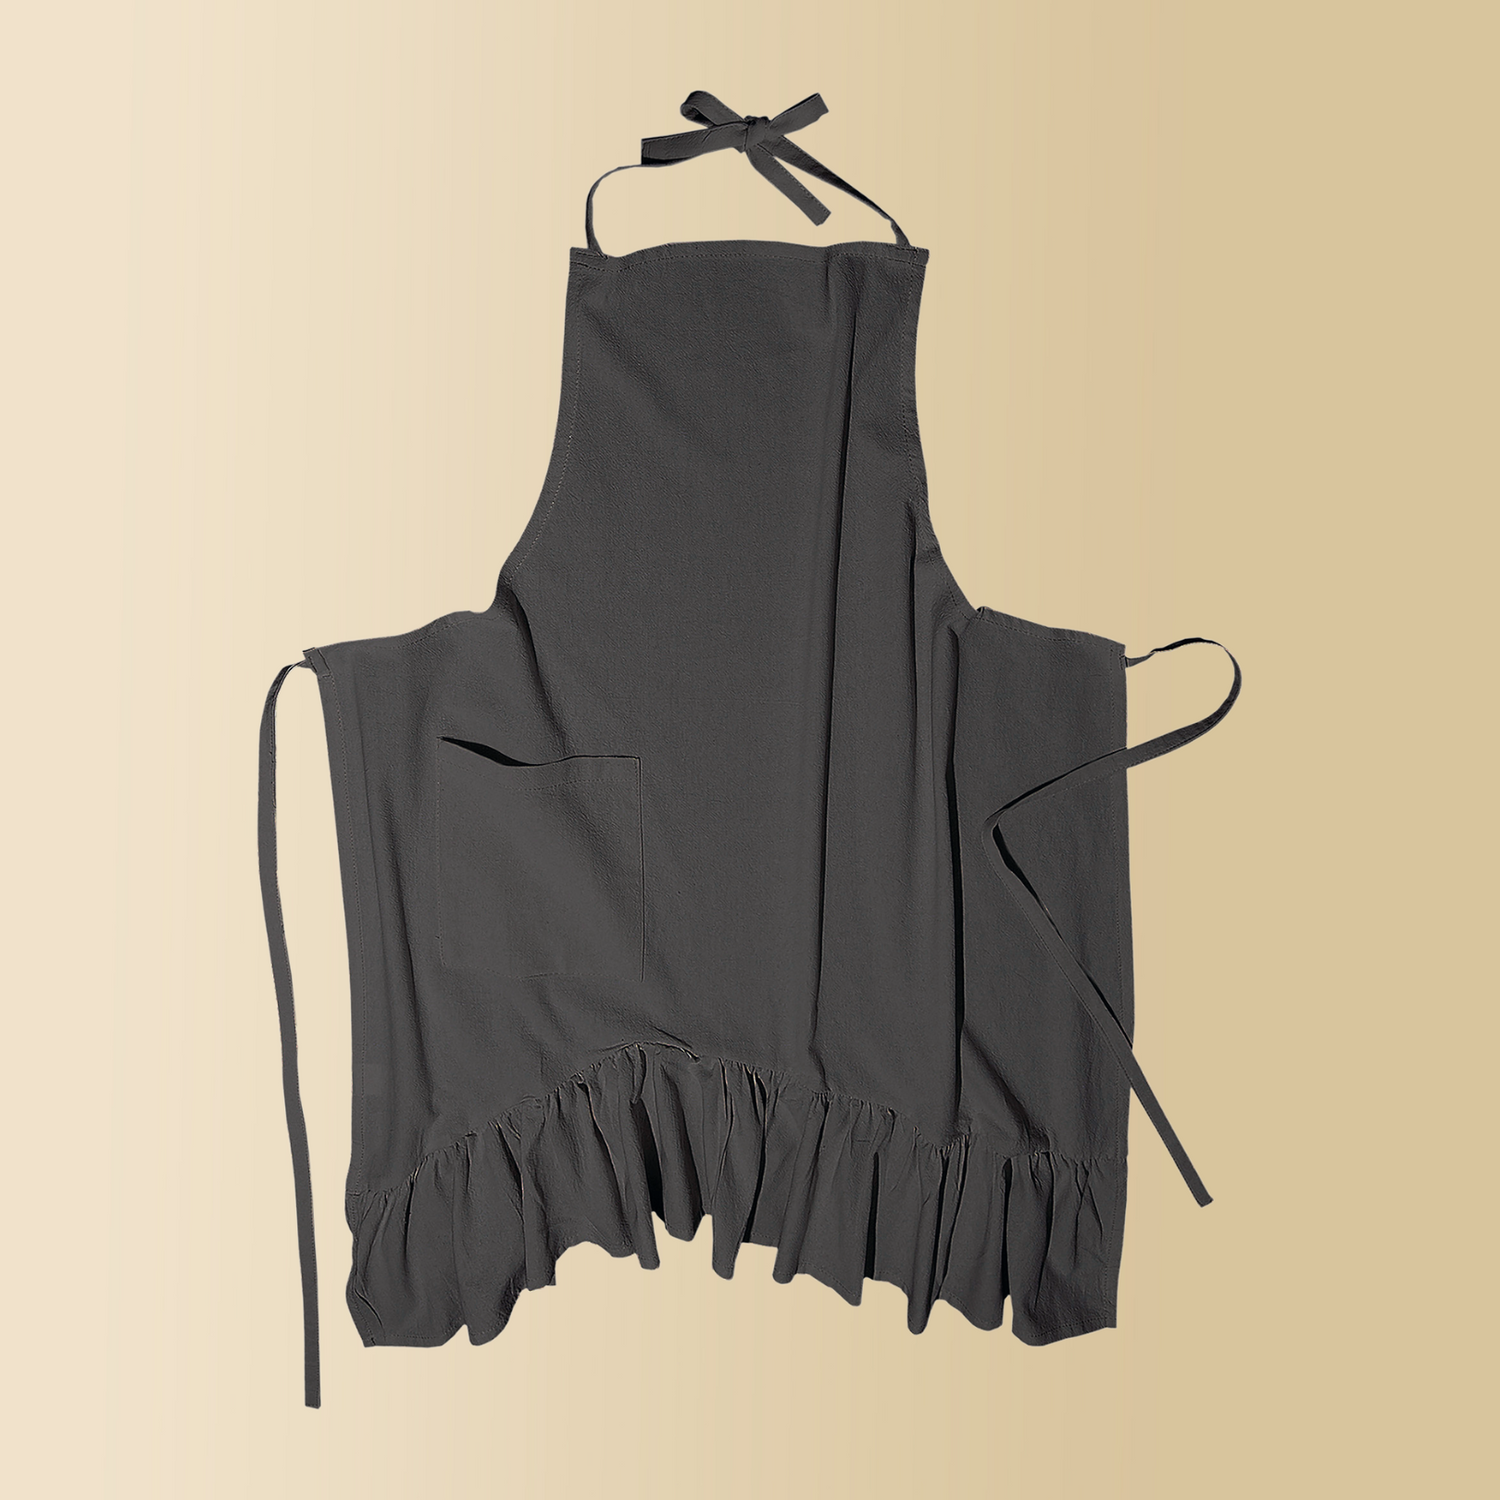 Apron made of linen blend in dark gray 